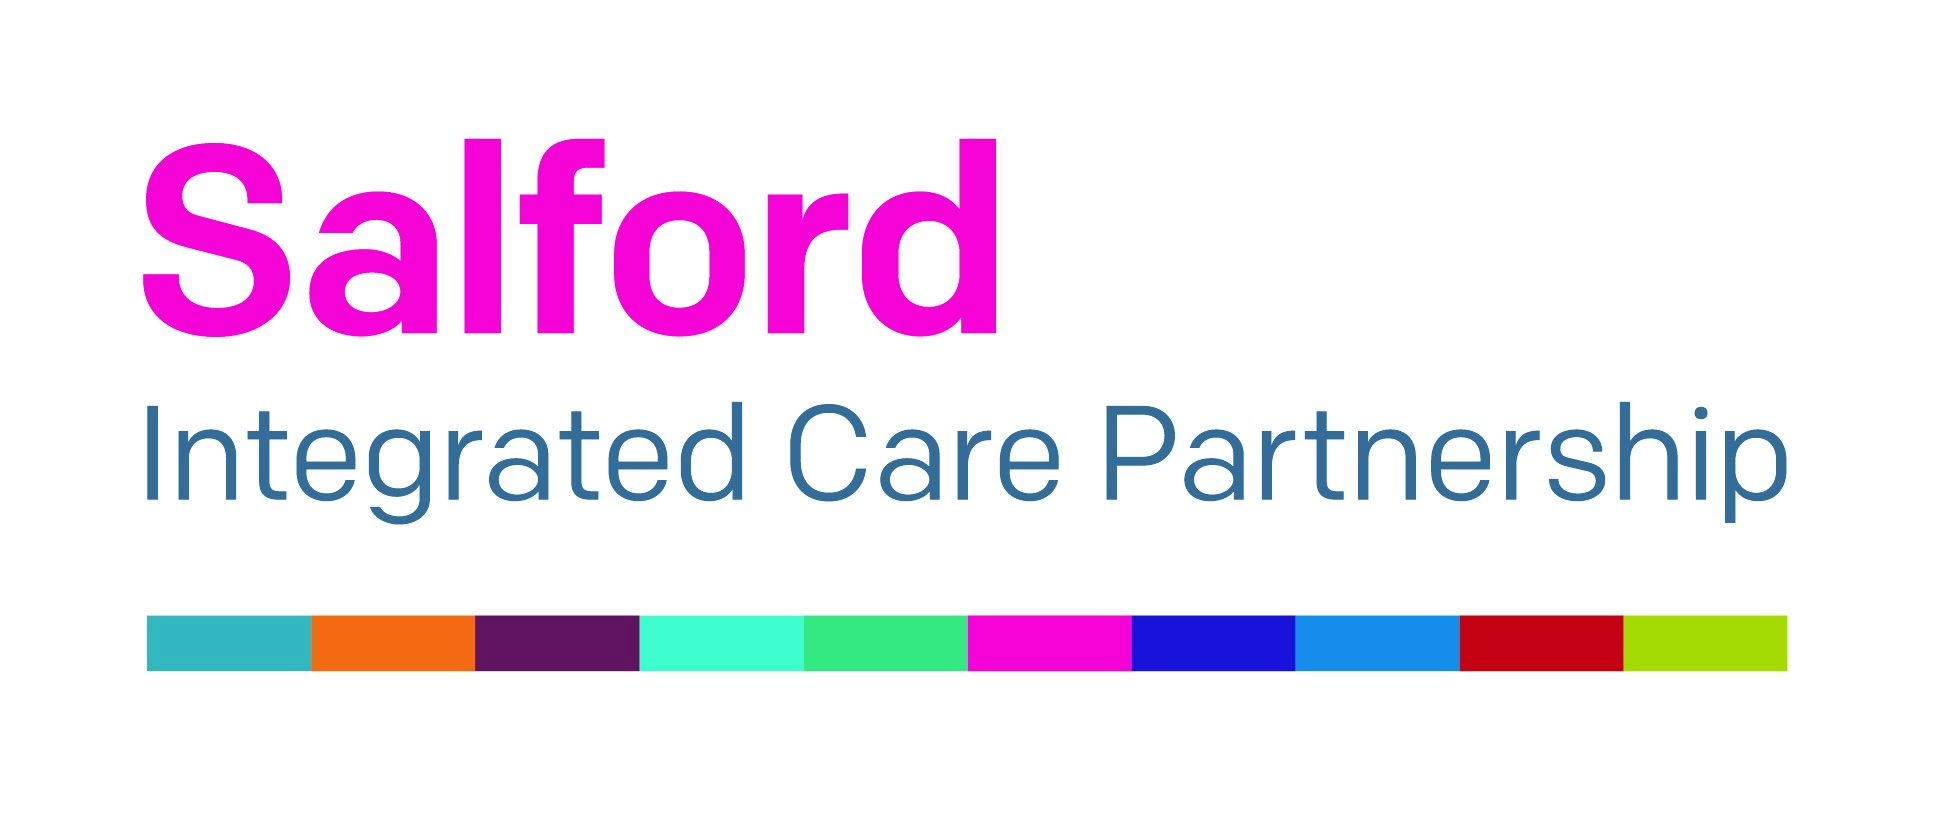 Salford Clinical Commissioning Group